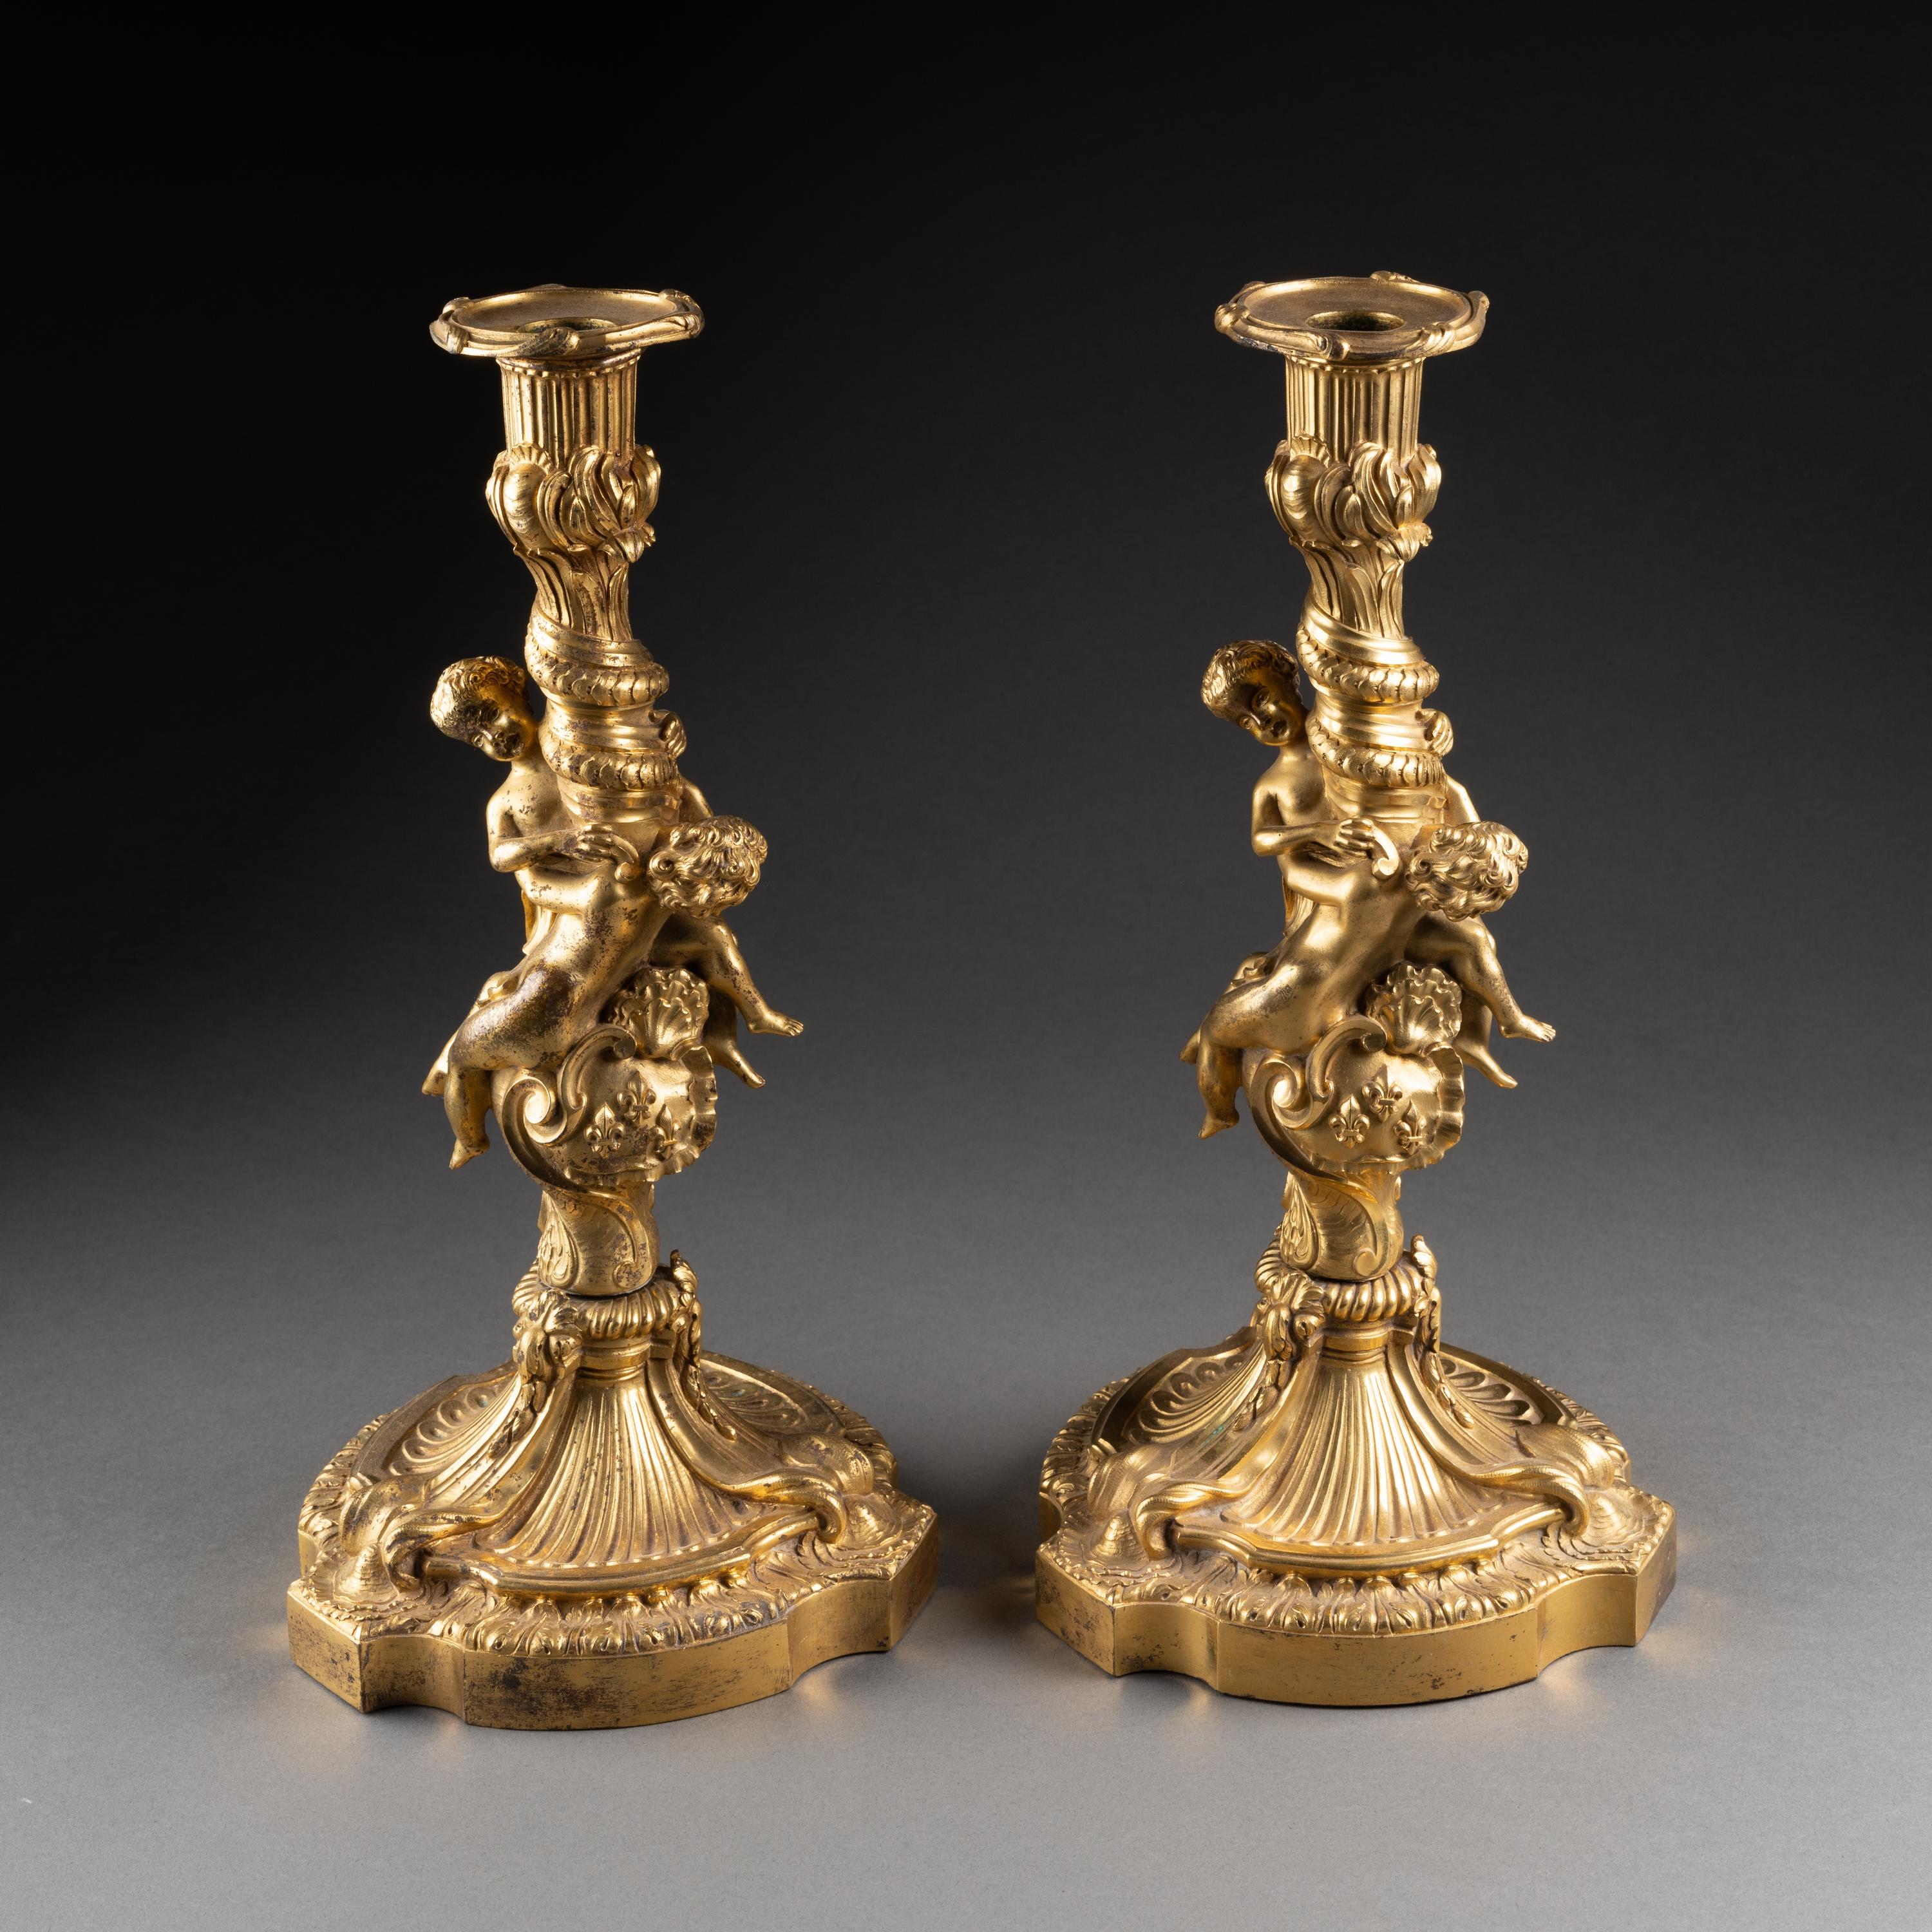 19th C. Pair of Louis XV Gilt Bronze Candlesticks with French Royal Coat of Arms For Sale 2